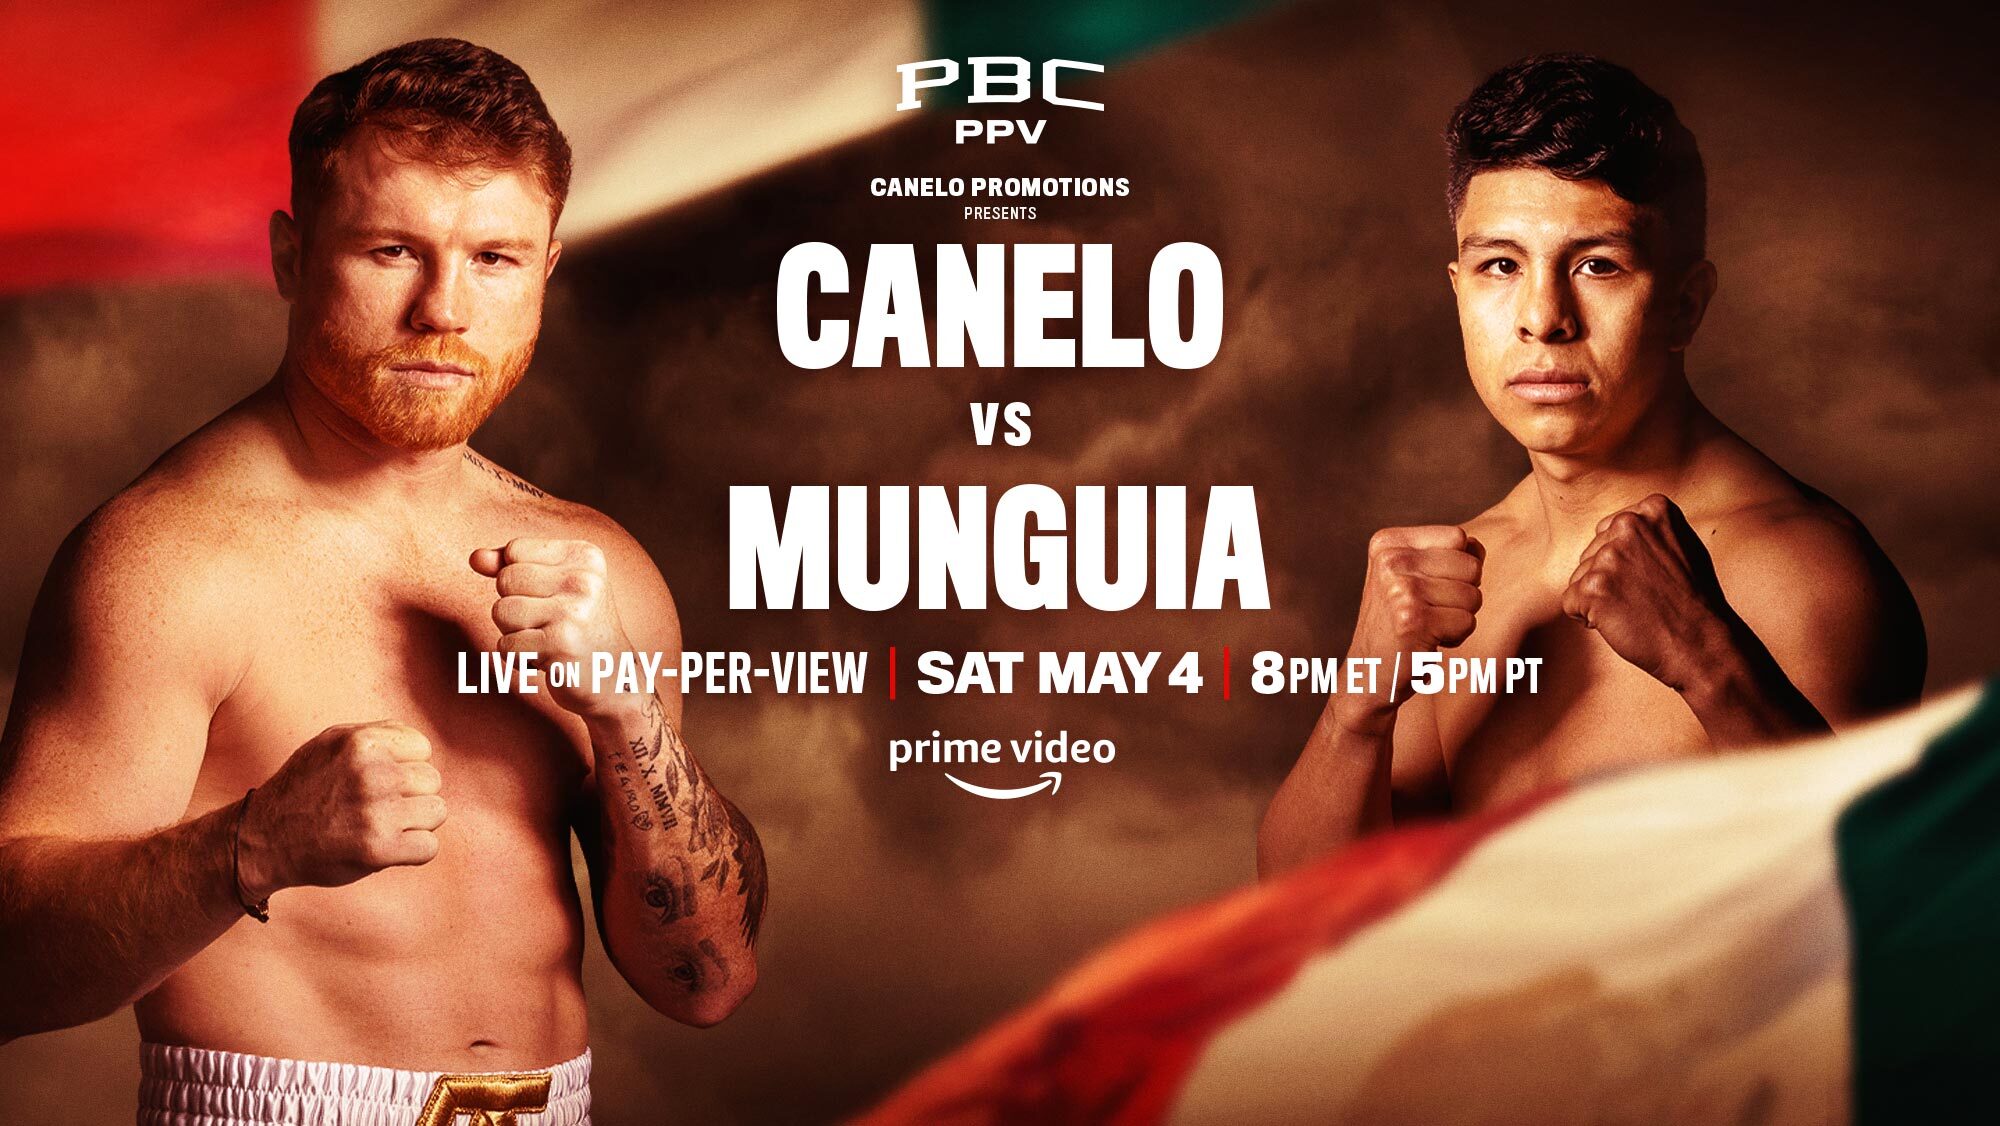 Canelo vs Munguia - Reddit Boxing Streams Live, How to Watch Online, Time, Fight Card